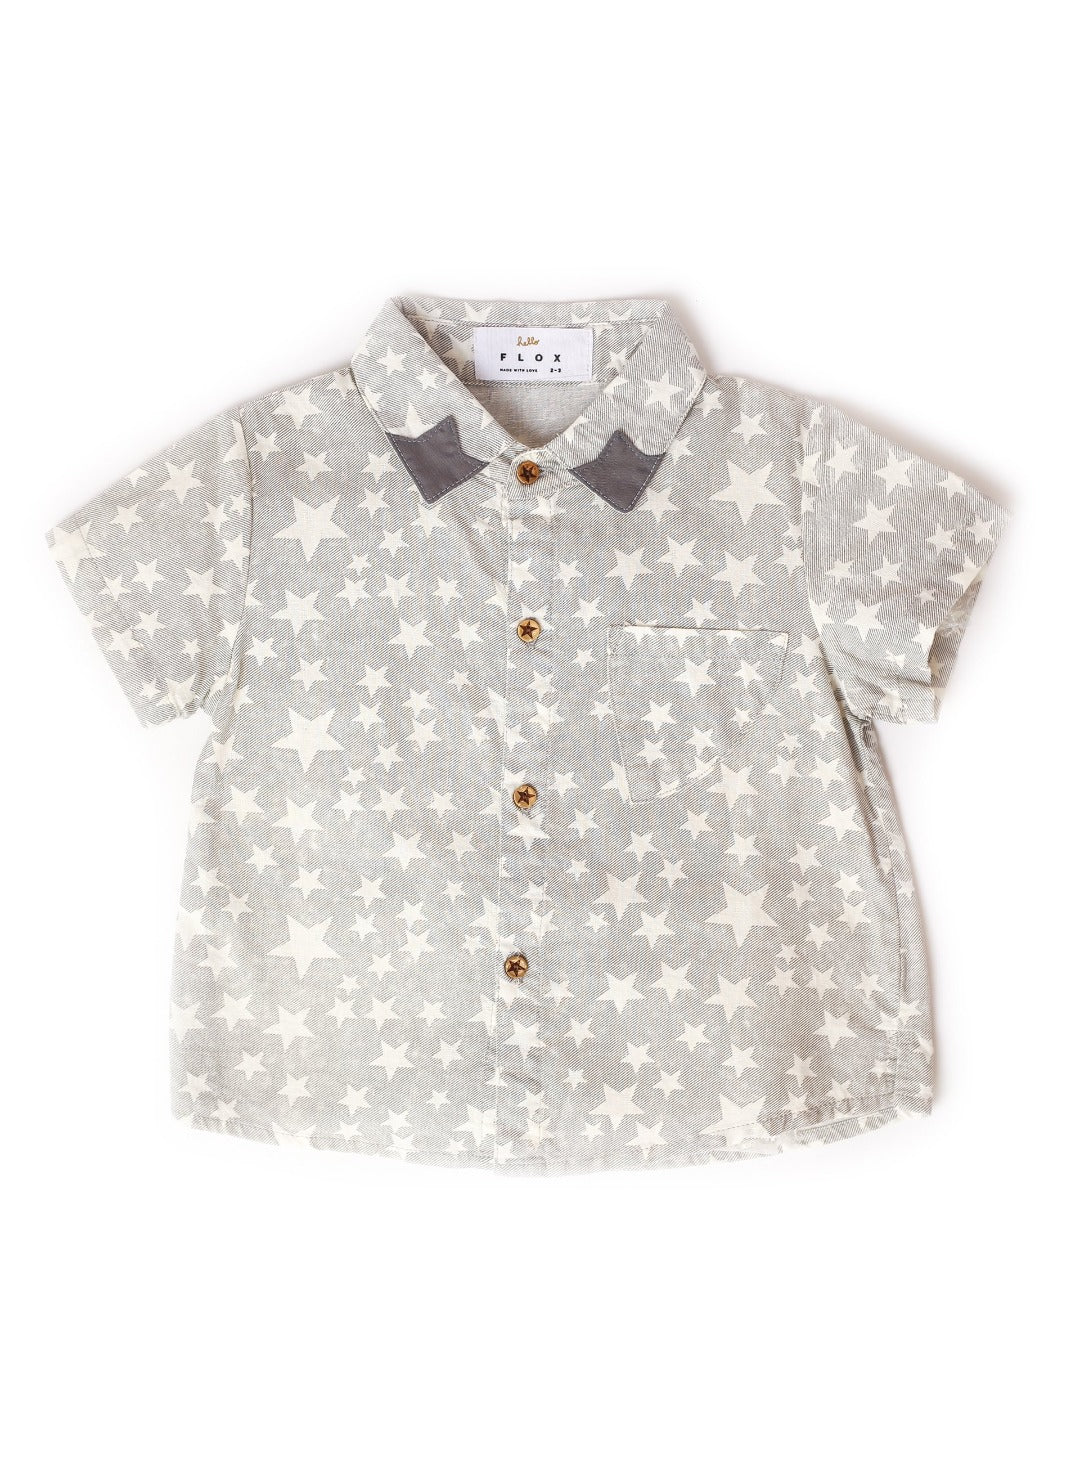 loose fit gray shirt with white stars print